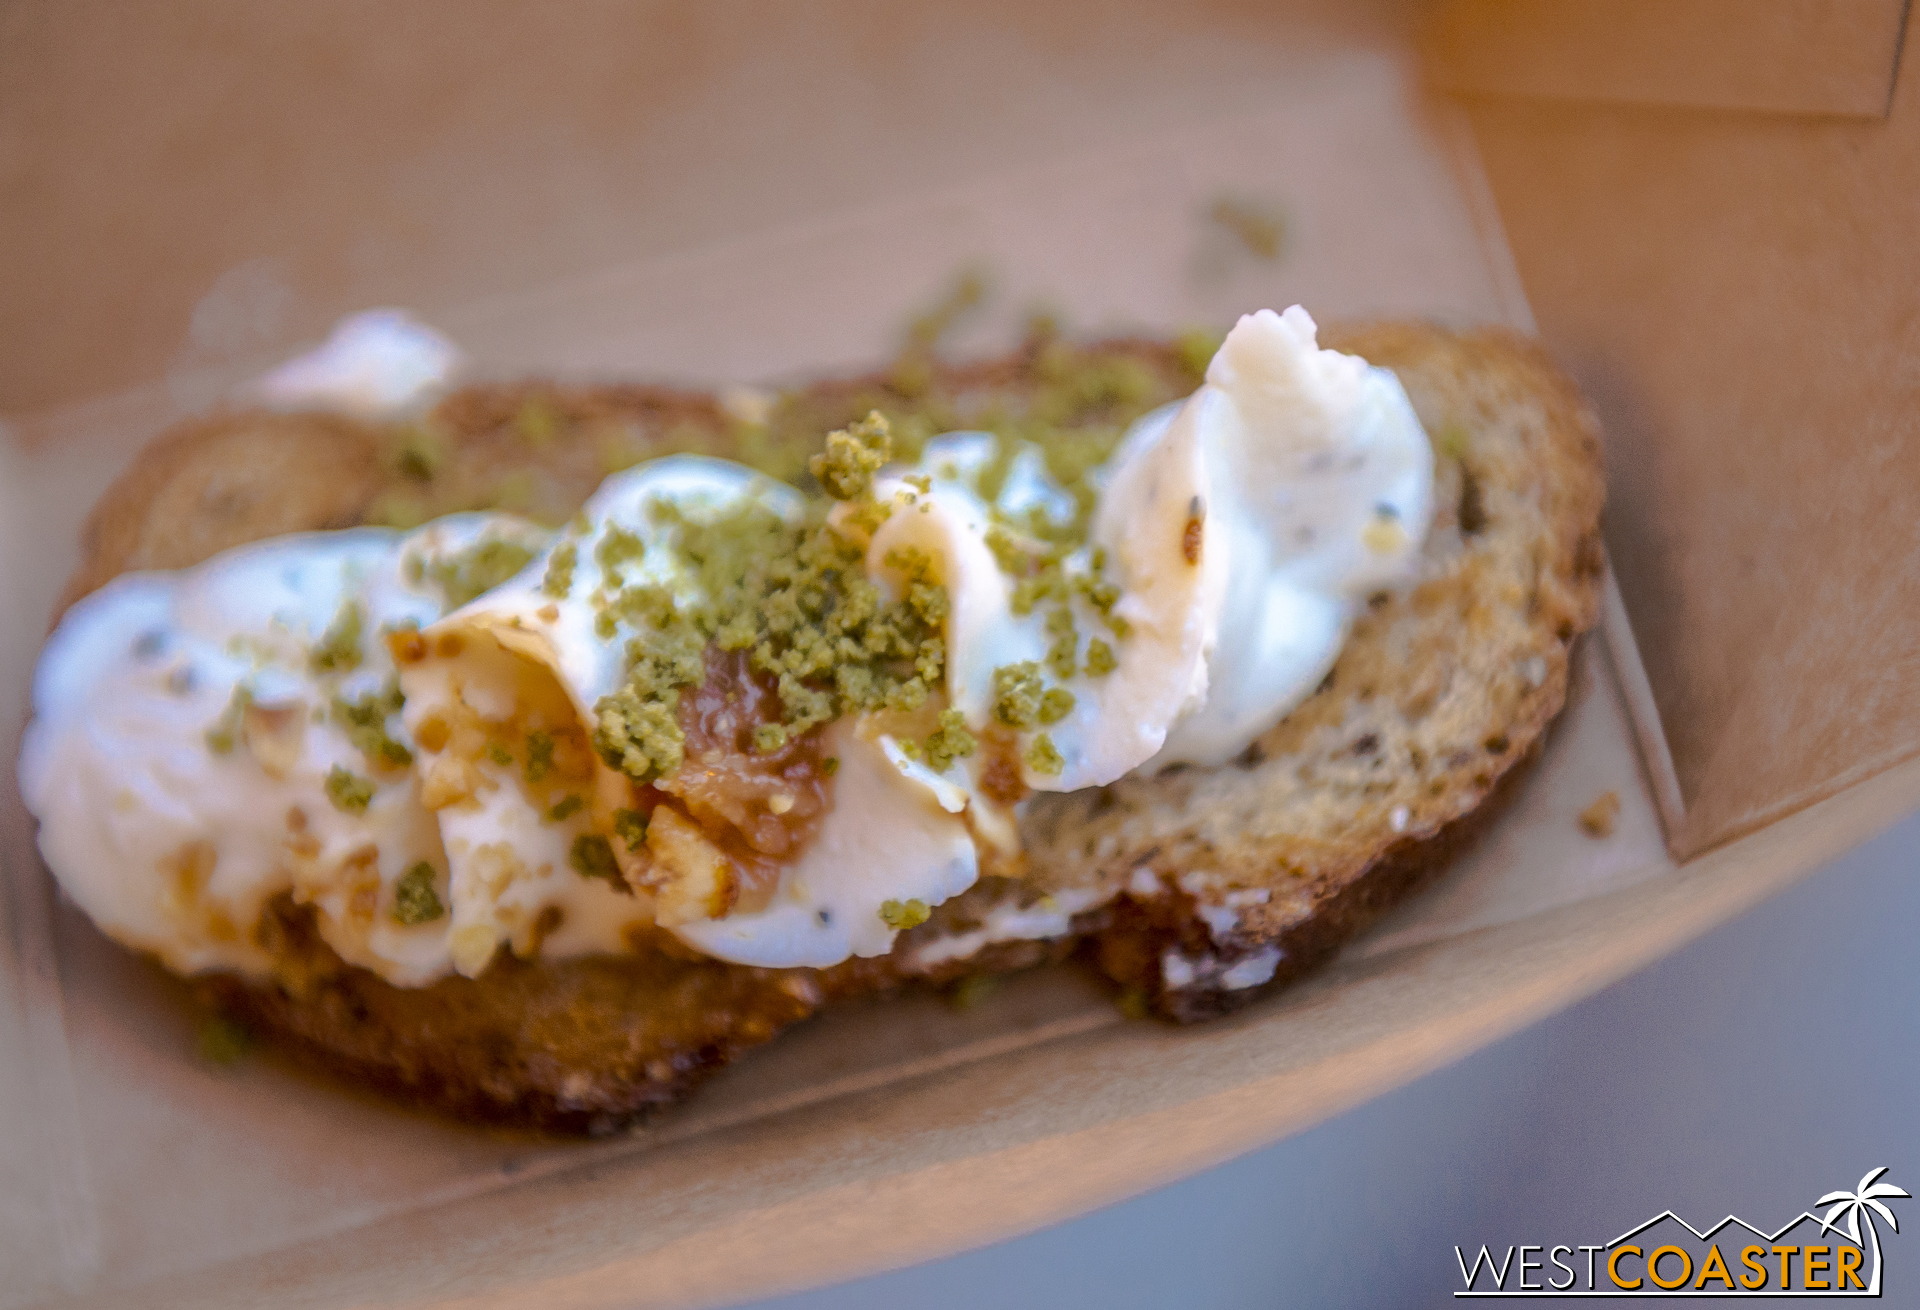  From Nuts About Cheese:  Chèvre Fromage Blanc Tartine  infused with Rosemary and Honey, with Toasted Hazelnuts ($4.50) 